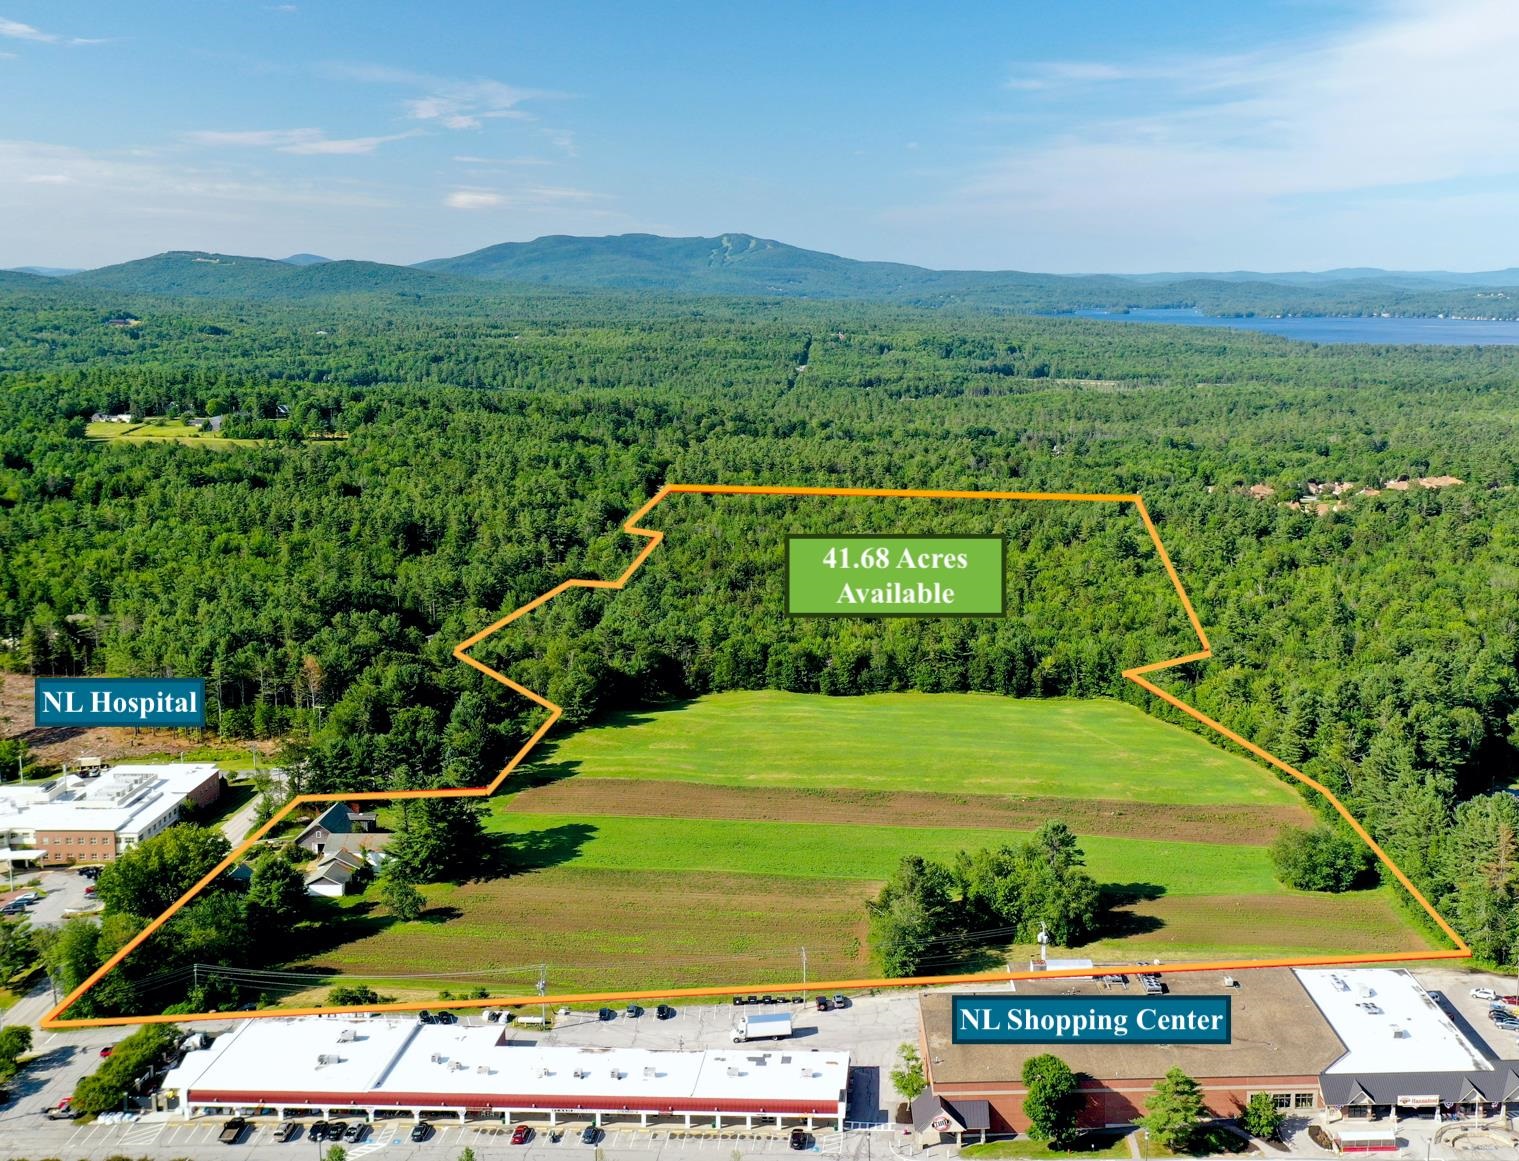 New London NH 03257 Commercial Property for sale $List Price is $3,520,000